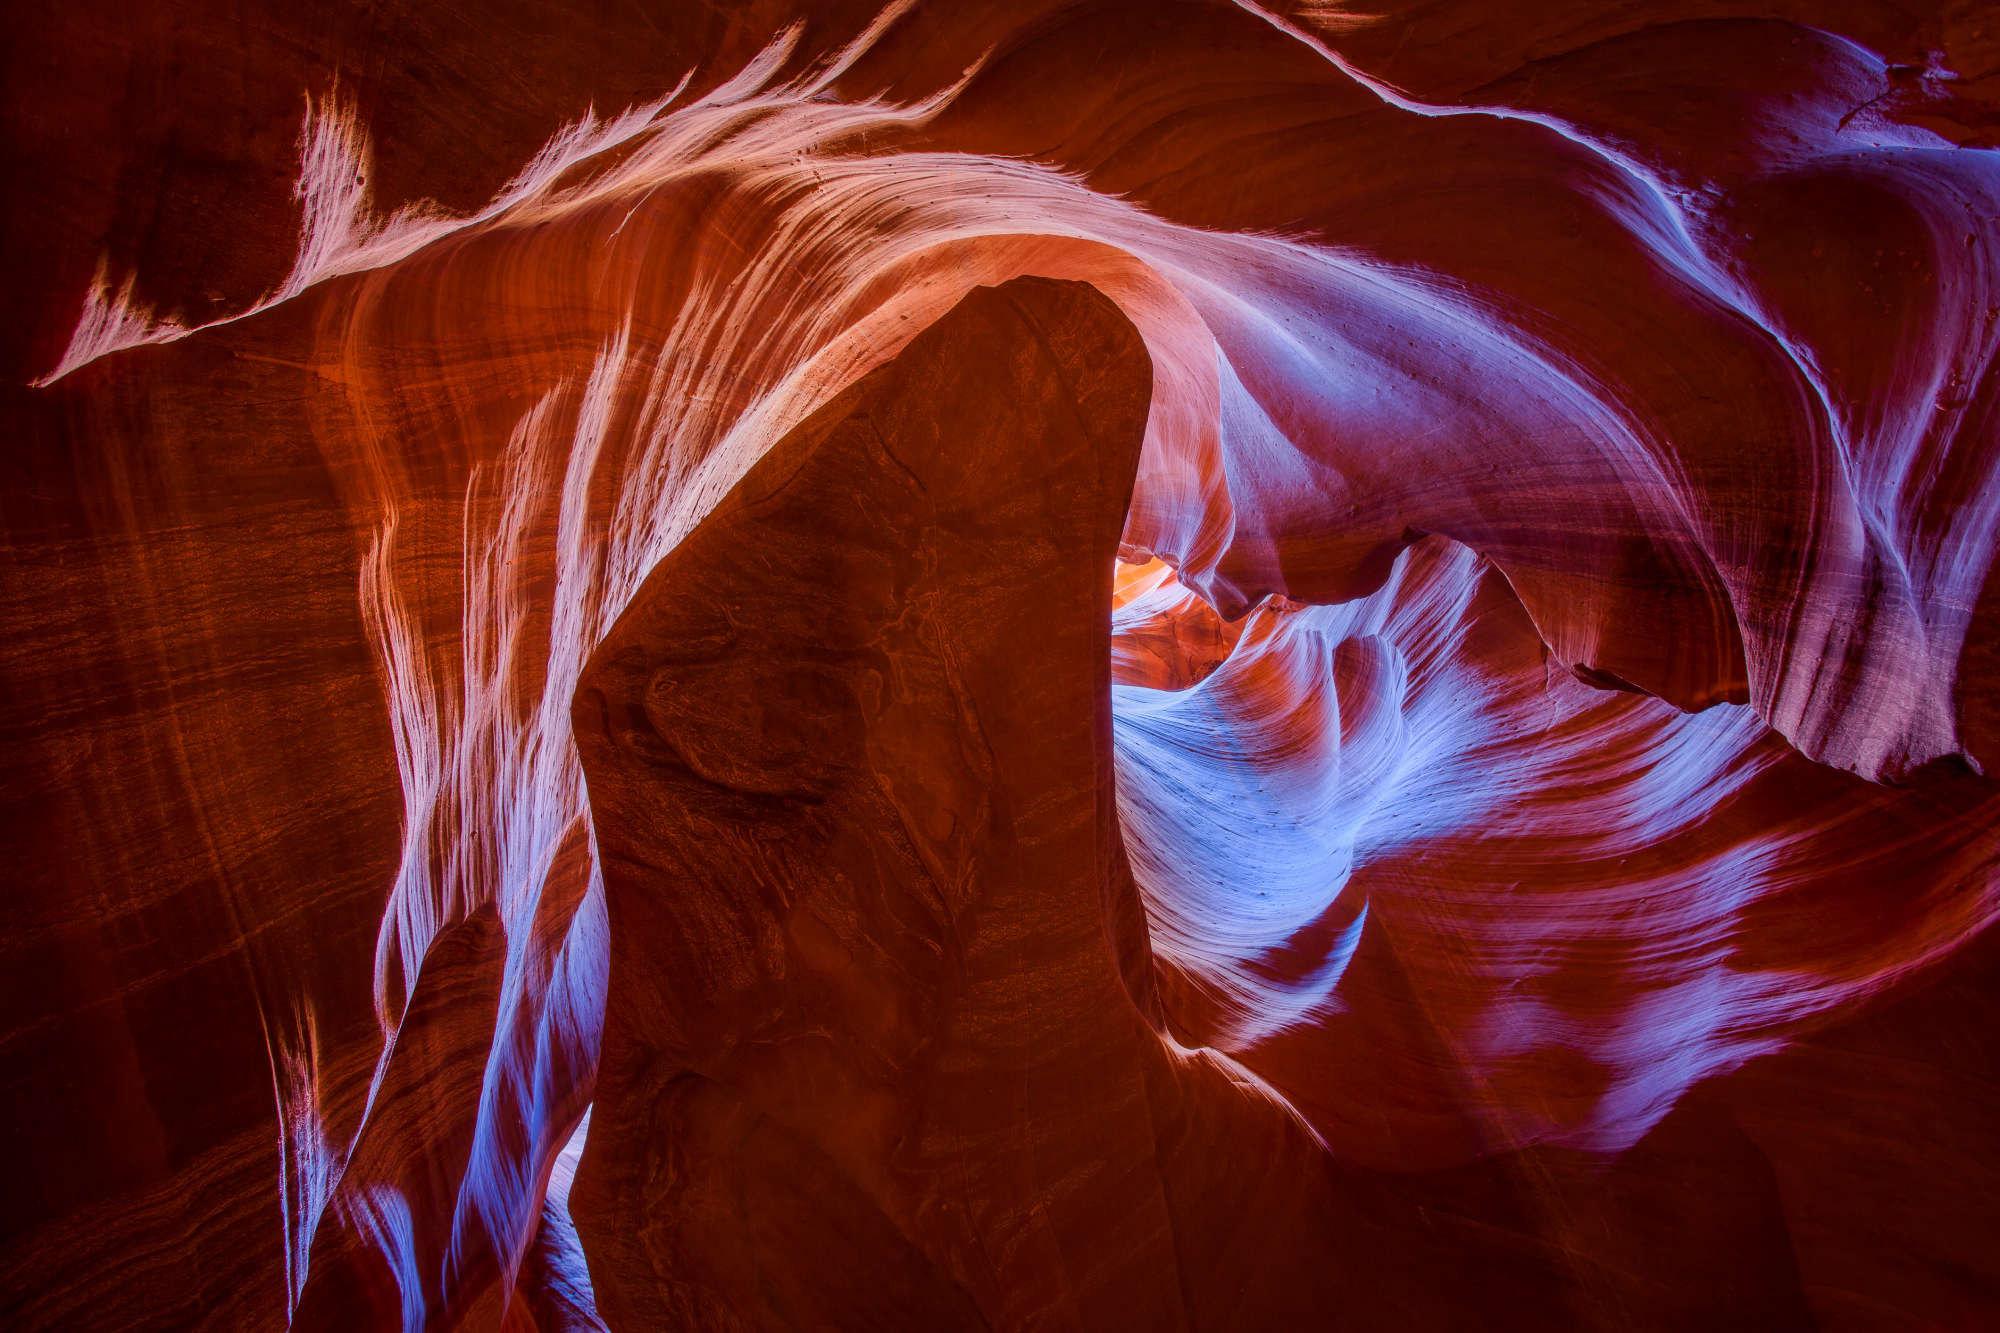 HDR Photography Workshop: Antelope Canyon HDR | Pt.4 | Final Image Processing